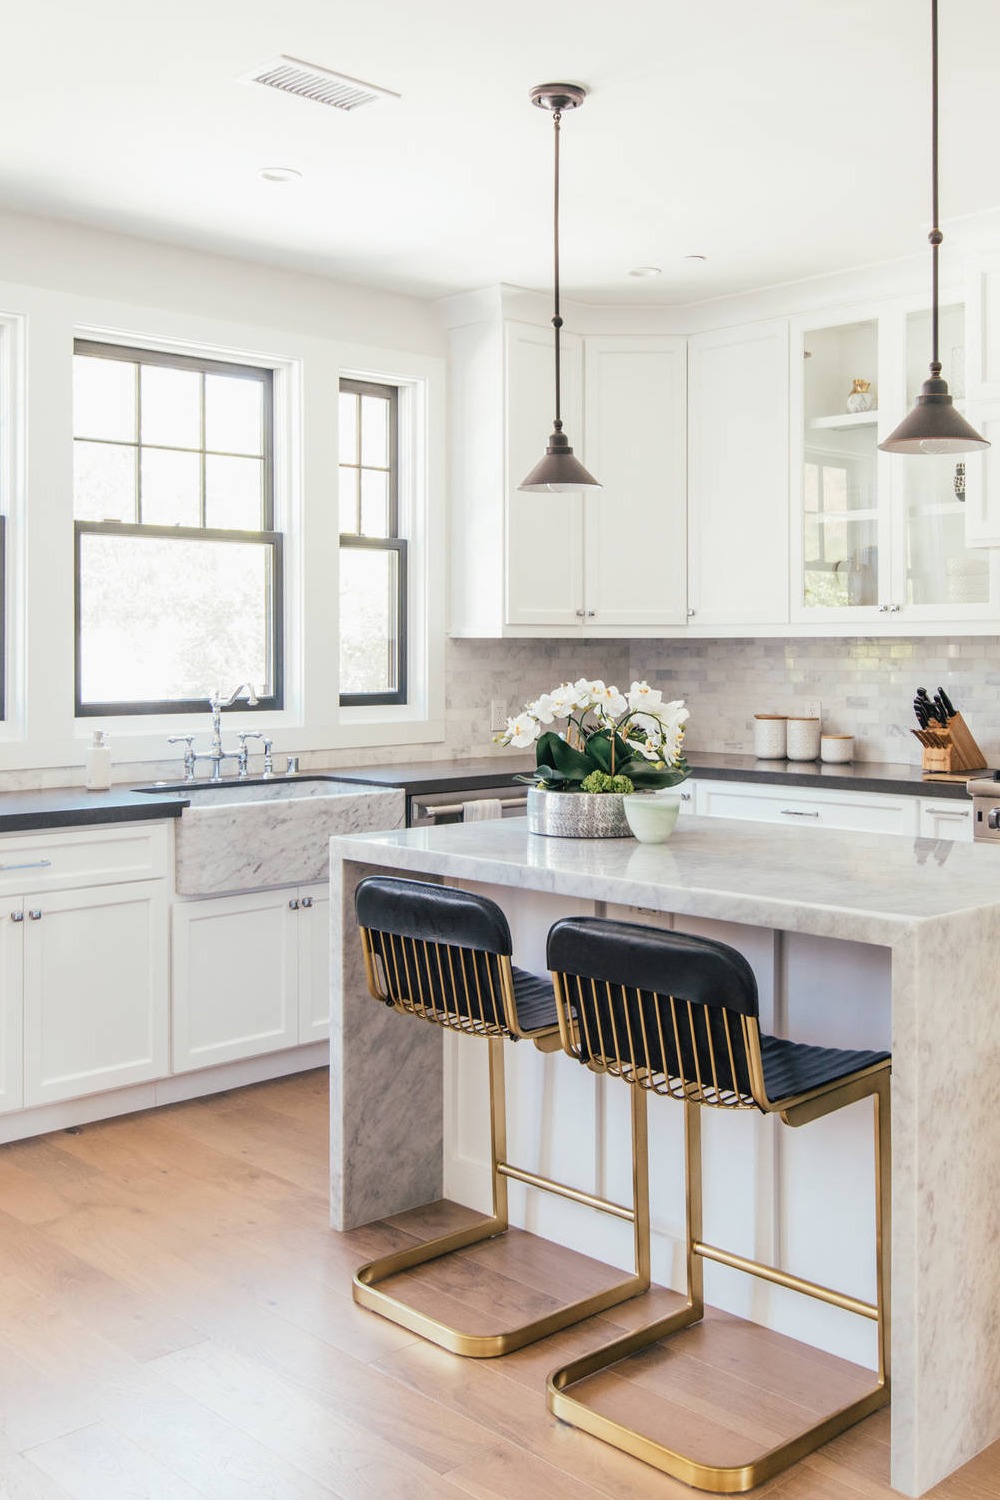 Island And Black Countertops Shaker Cabinets Granite Countertops White Cabinets White Backsplash And Black Countertops Tile Backsplash Farmhouse Sink